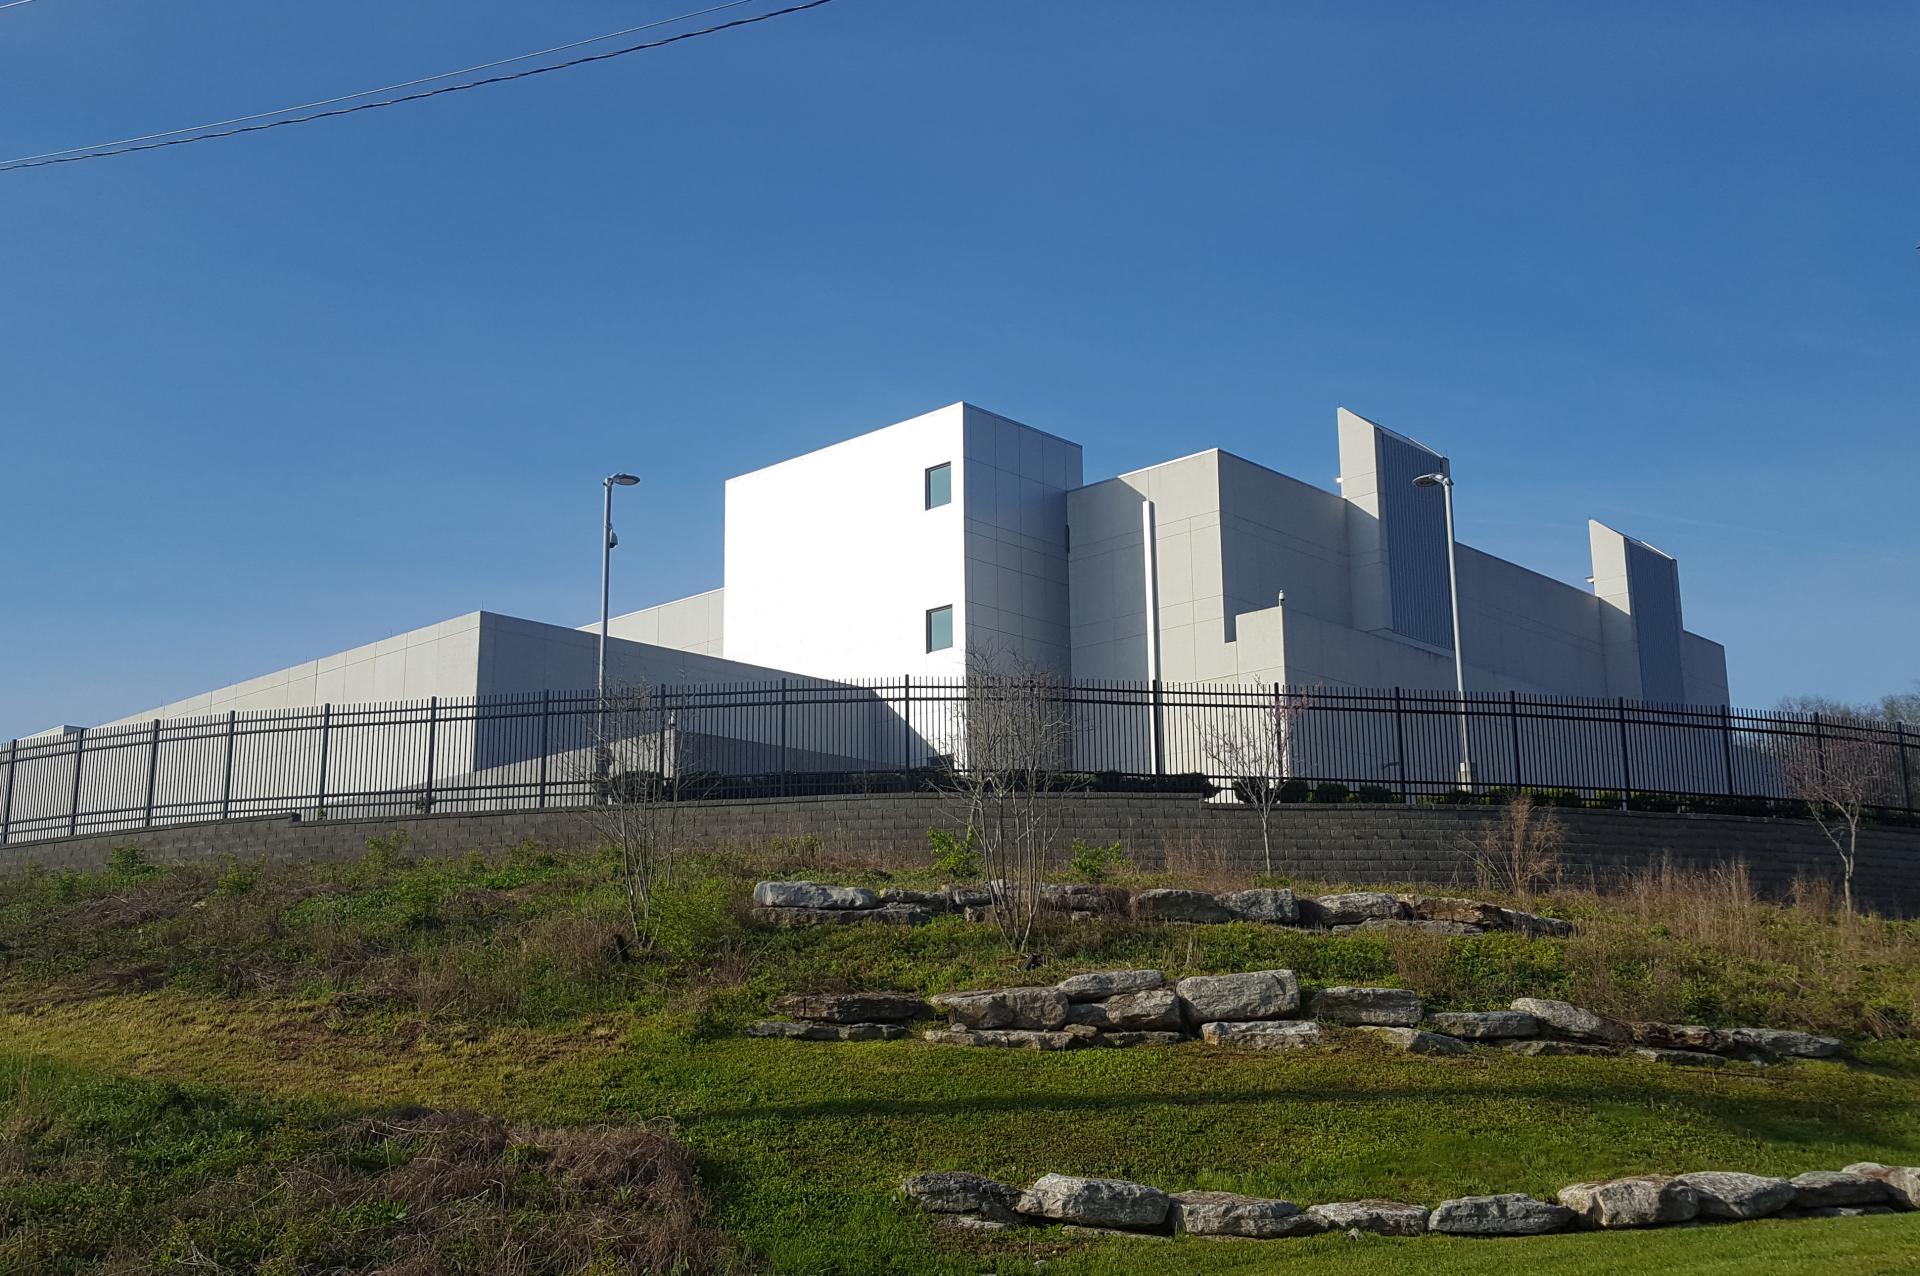 Secure data center facility sits atop a hilly raised plinth